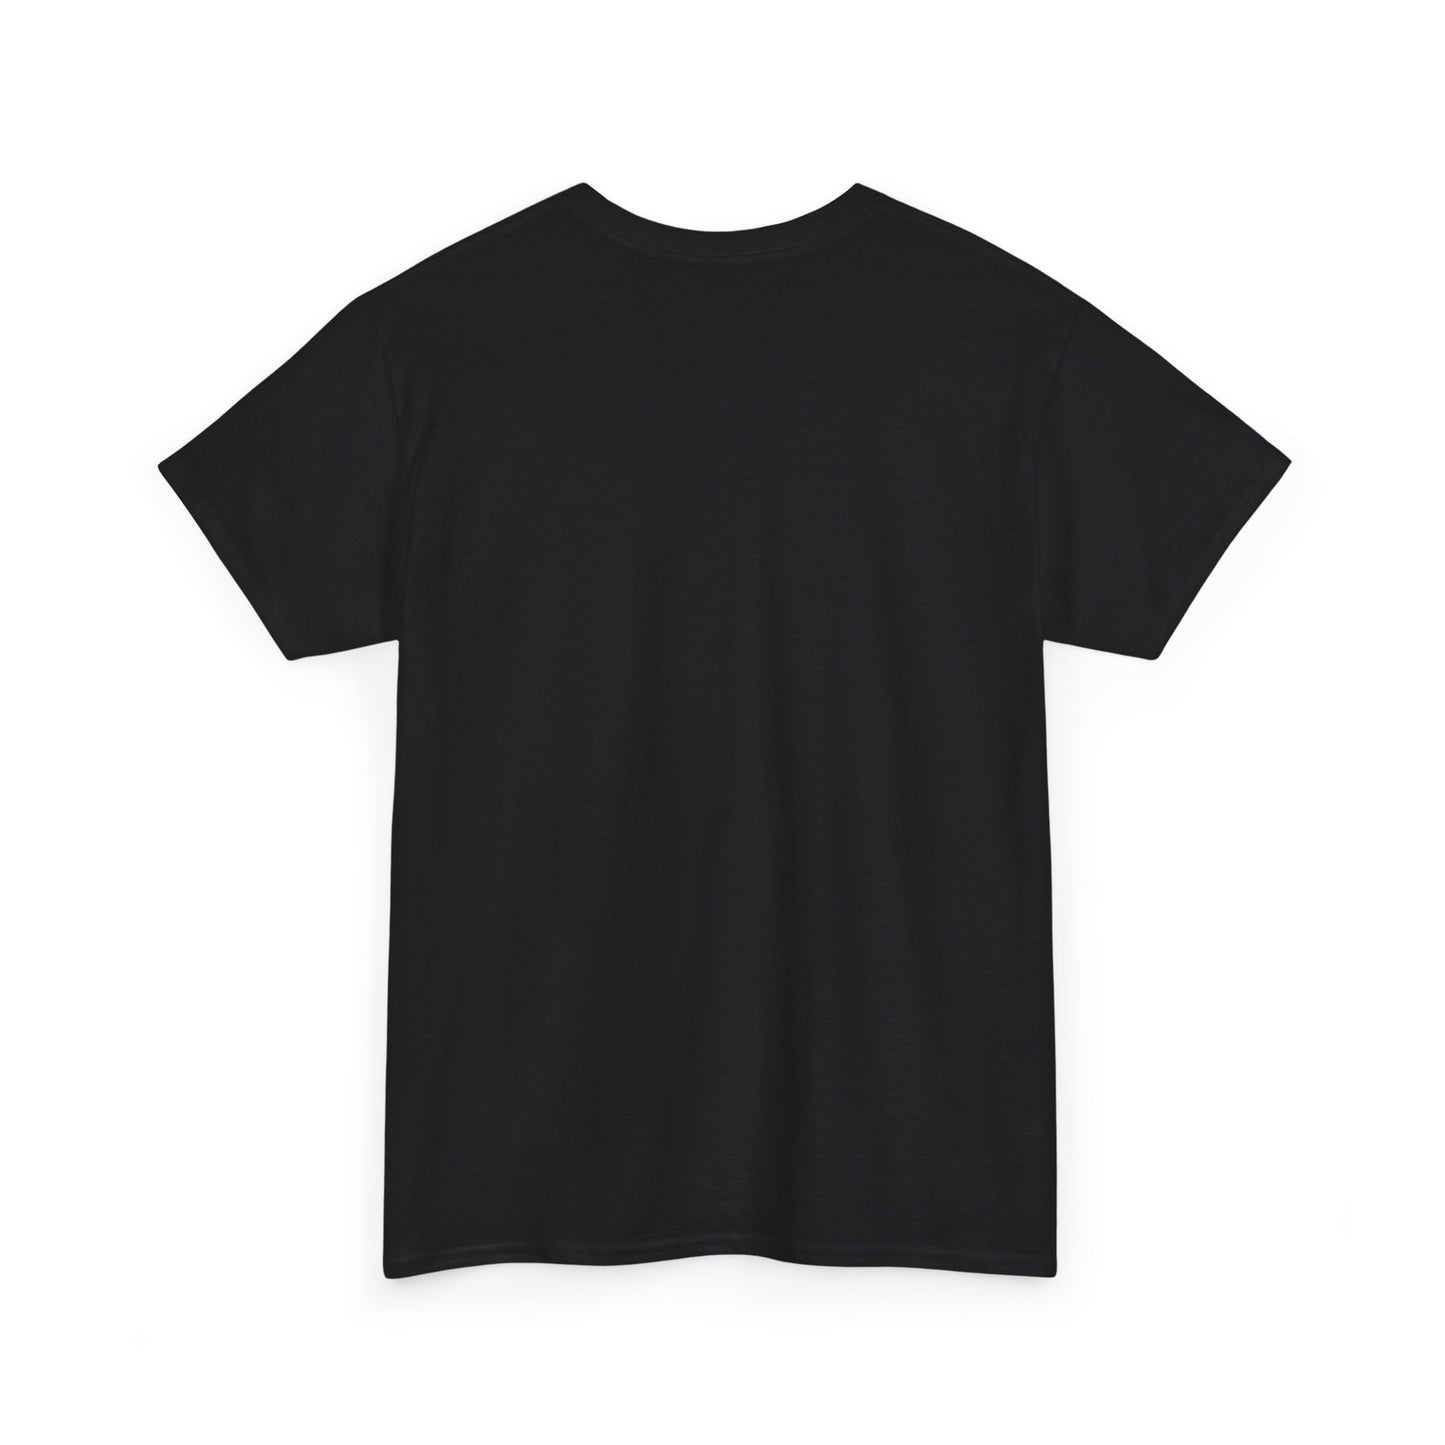 Eric Pike lll Heavy Cotton Tee